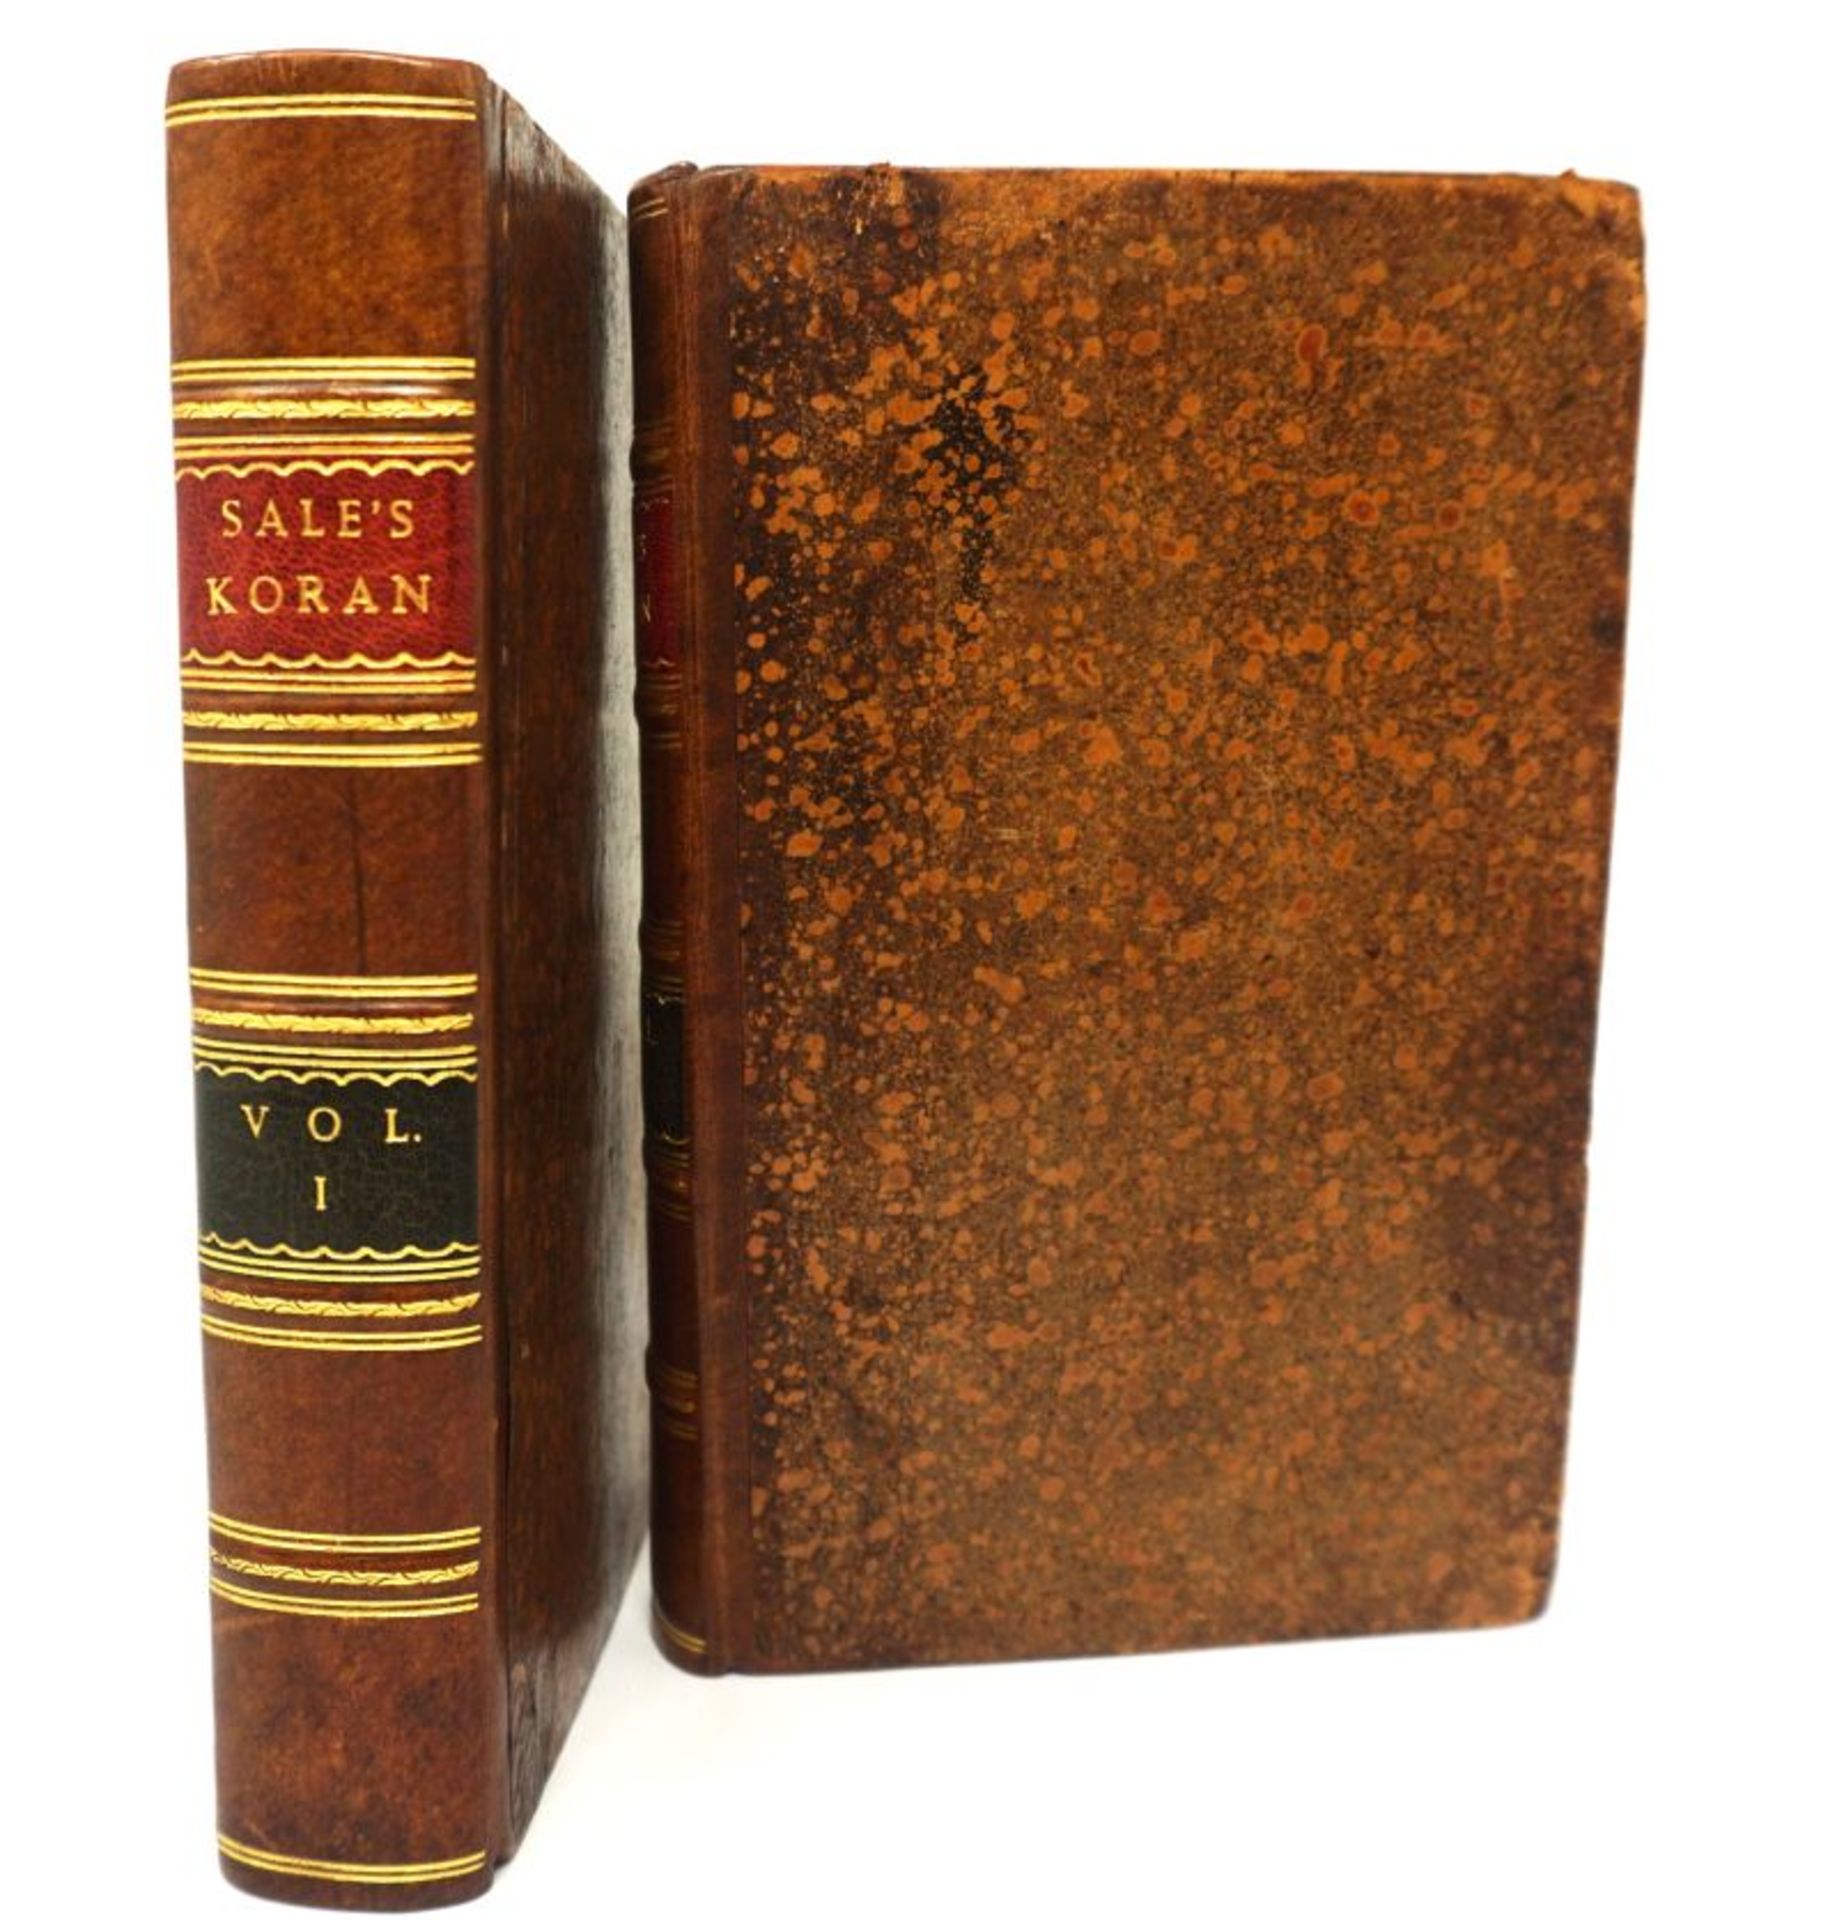 Sale, George: The Koran, commonly called The Alcoran 